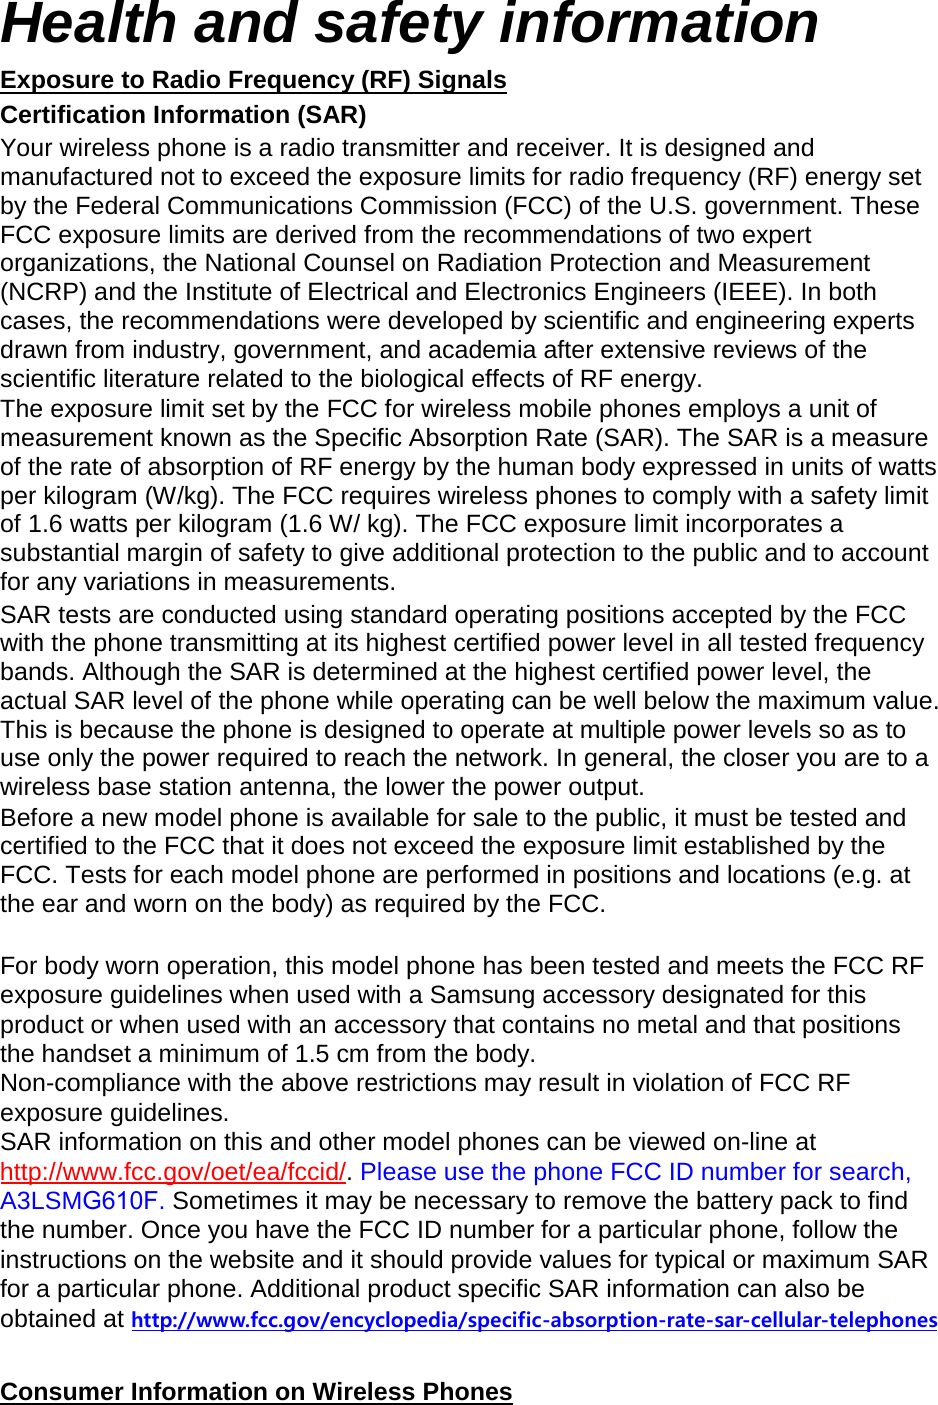 Health and safety information Exposure to Radio Frequency (RF) Signals Certification Information (SAR) Your wireless phone is a radio transmitter and receiver. It is designed and manufactured not to exceed the exposure limits for radio frequency (RF) energy set by the Federal Communications Commission (FCC) of the U.S. government. These FCC exposure limits are derived from the recommendations of two expert organizations, the National Counsel on Radiation Protection and Measurement (NCRP) and the Institute of Electrical and Electronics Engineers (IEEE). In both cases, the recommendations were developed by scientific and engineering experts drawn from industry, government, and academia after extensive reviews of the scientific literature related to the biological effects of RF energy. The exposure limit set by the FCC for wireless mobile phones employs a unit of measurement known as the Specific Absorption Rate (SAR). The SAR is a measure of the rate of absorption of RF energy by the human body expressed in units of watts per kilogram (W/kg). The FCC requires wireless phones to comply with a safety limit of 1.6 watts per kilogram (1.6 W/ kg). The FCC exposure limit incorporates a substantial margin of safety to give additional protection to the public and to account for any variations in measurements. SAR tests are conducted using standard operating positions accepted by the FCC with the phone transmitting at its highest certified power level in all tested frequency bands. Although the SAR is determined at the highest certified power level, the actual SAR level of the phone while operating can be well below the maximum value. This is because the phone is designed to operate at multiple power levels so as to use only the power required to reach the network. In general, the closer you are to a wireless base station antenna, the lower the power output. Before a new model phone is available for sale to the public, it must be tested and certified to the FCC that it does not exceed the exposure limit established by the FCC. Tests for each model phone are performed in positions and locations (e.g. at the ear and worn on the body) as required by the FCC.     For body worn operation, this model phone has been tested and meets the FCC RF exposure guidelines when used with a Samsung accessory designated for this product or when used with an accessory that contains no metal and that positions the handset a minimum of 1.5 cm from the body.  Non-compliance with the above restrictions may result in violation of FCC RF exposure guidelines. SAR information on this and other model phones can be viewed on-line at http://www.fcc.gov/oet/ea/fccid/. Please use the phone FCC ID number for search, A3LSMG610F. Sometimes it may be necessary to remove the battery pack to find the number. Once you have the FCC ID number for a particular phone, follow the instructions on the website and it should provide values for typical or maximum SAR for a particular phone. Additional product specific SAR information can also be obtained at http://www.fcc.gov/encyclopedia/specific-absorption-rate-sar-cellular-telephonesConsumer Information on Wireless Phones 